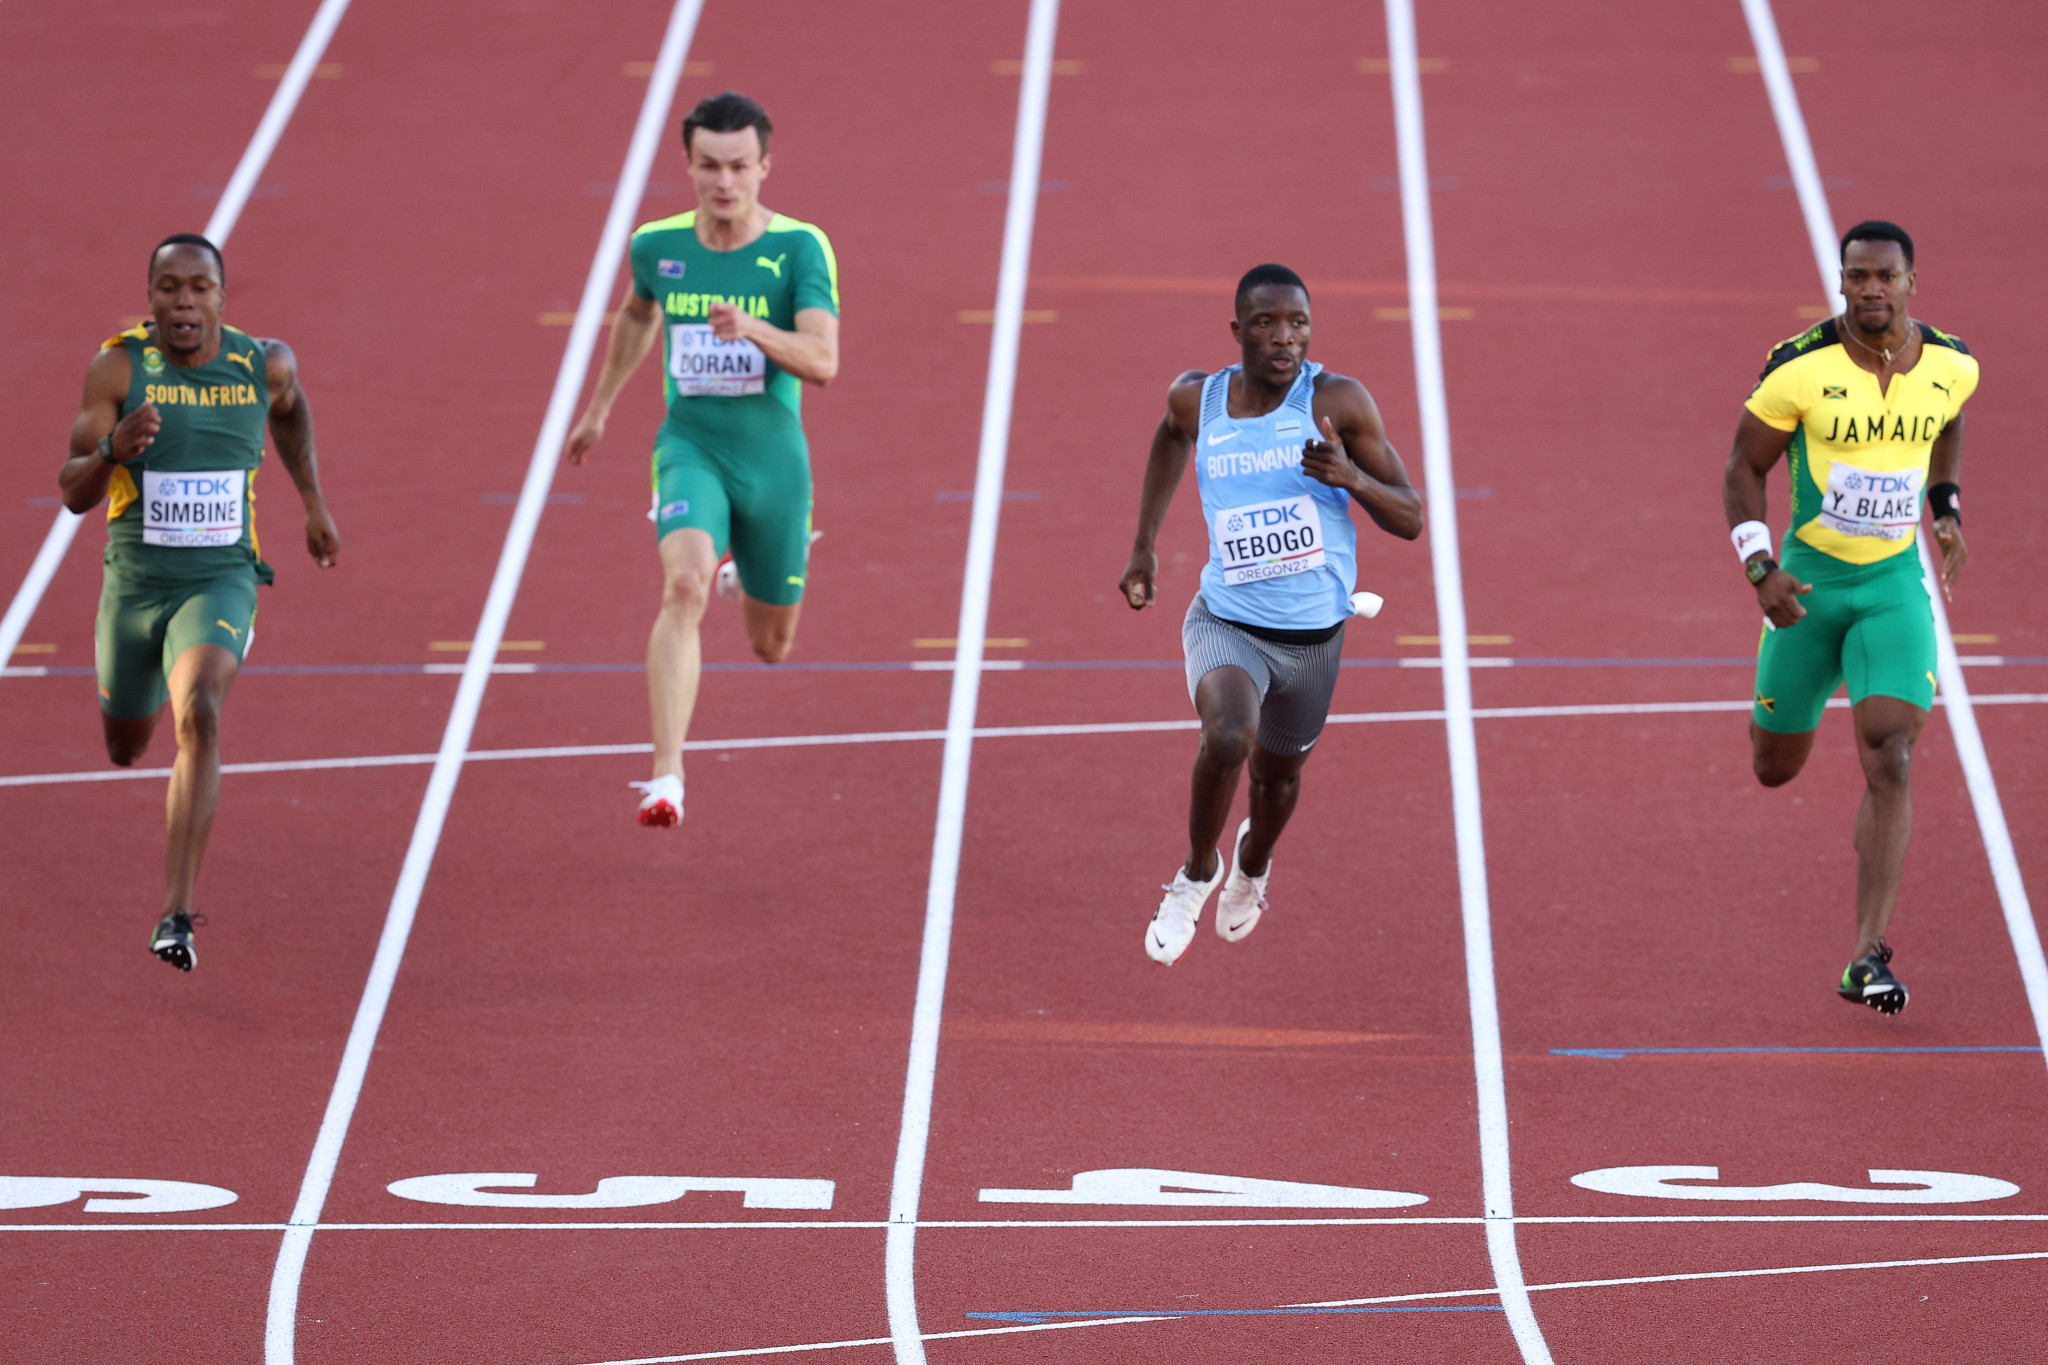 Botswana teenager Letsile Tebogo broke the world under-20 record after a storming performance in the first-round of the men’s 100m ©Getty Images